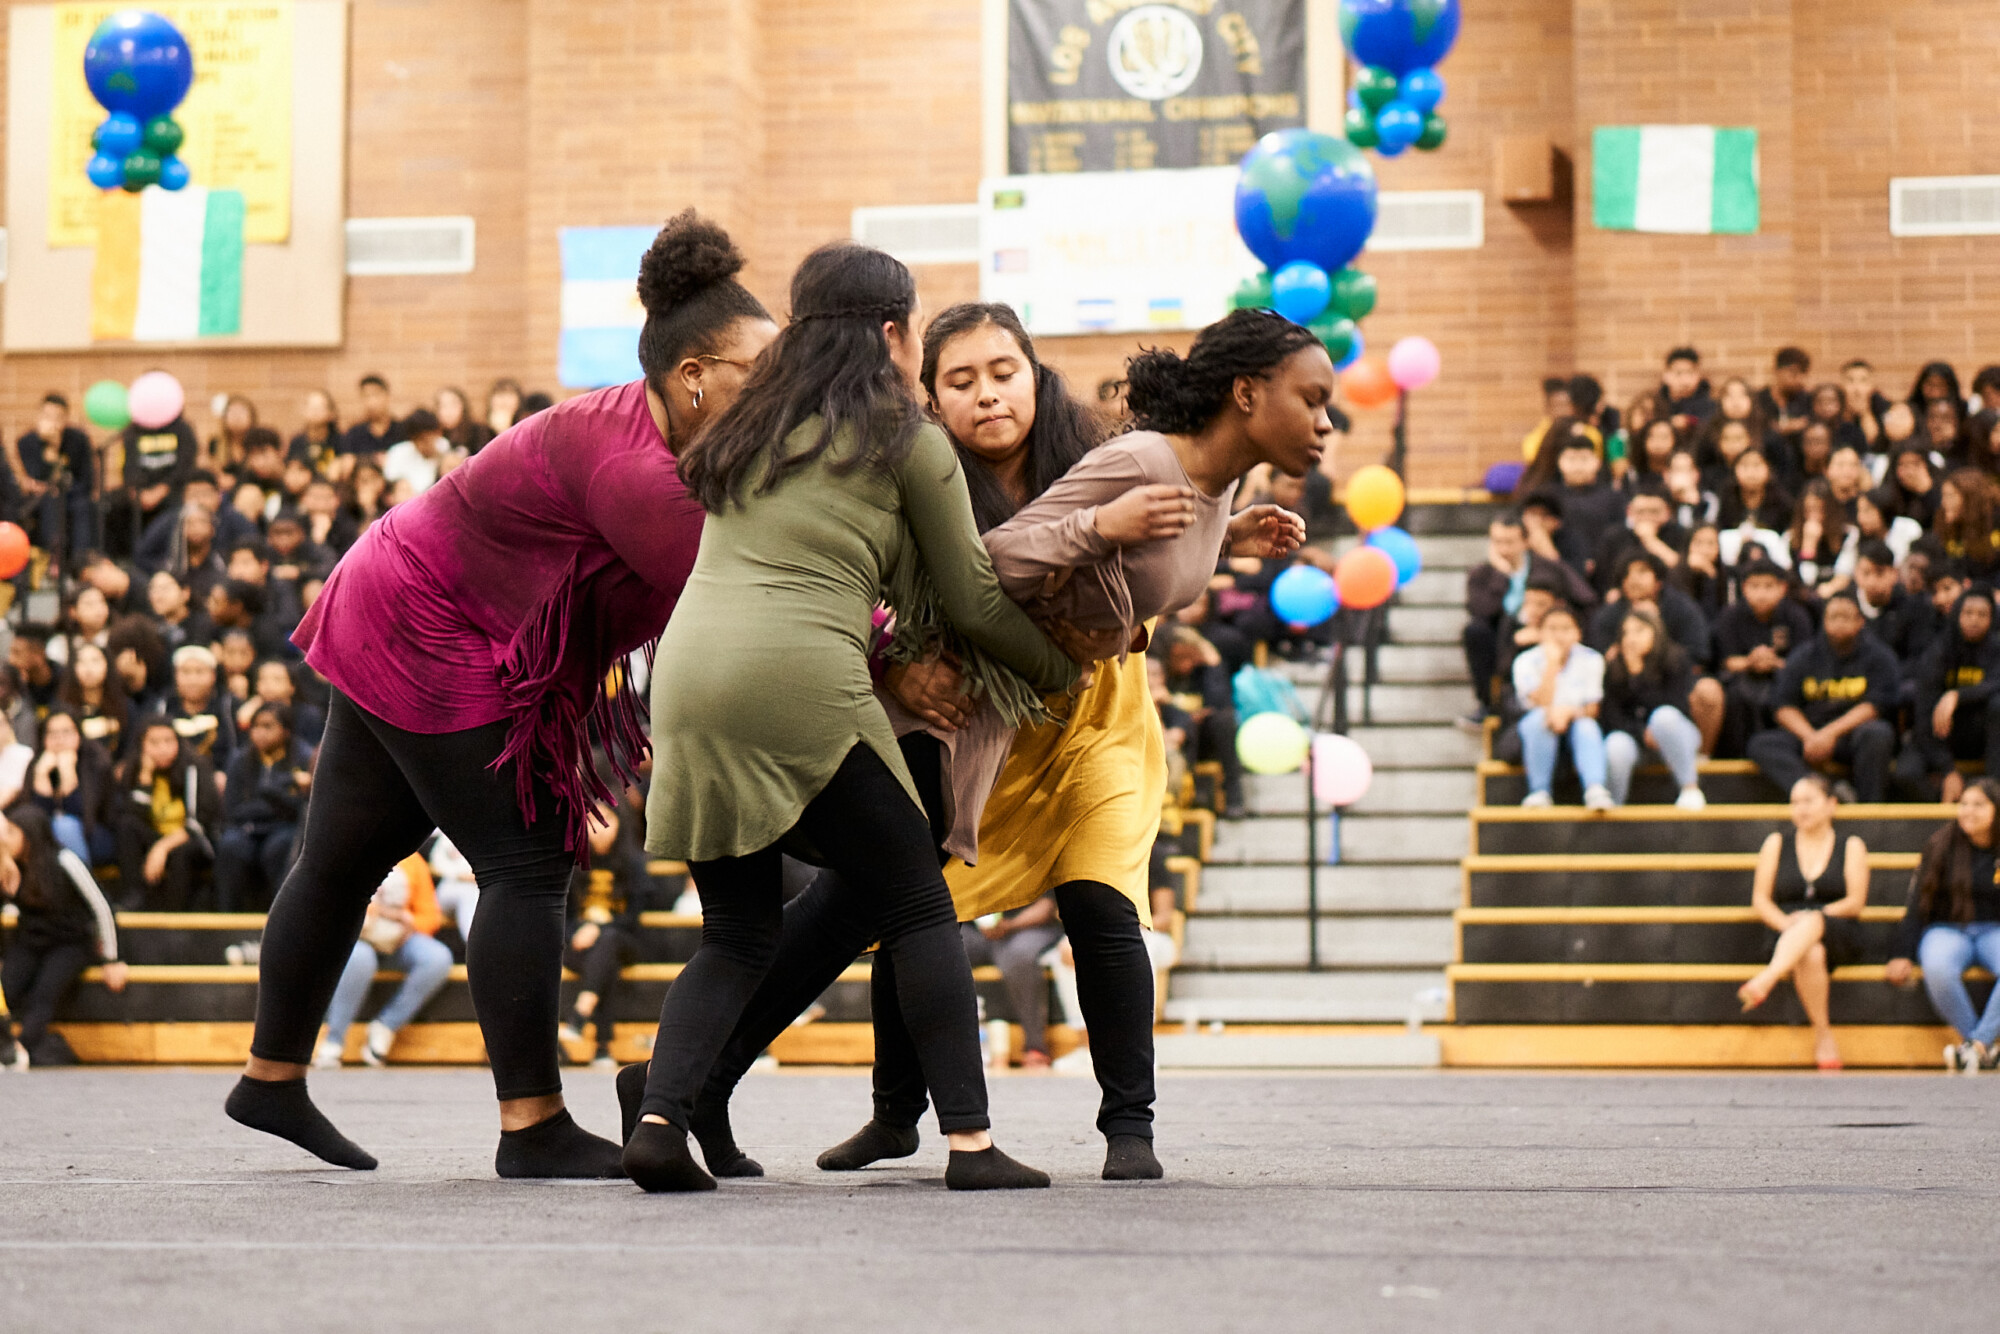 Dance students performing at a school assembly